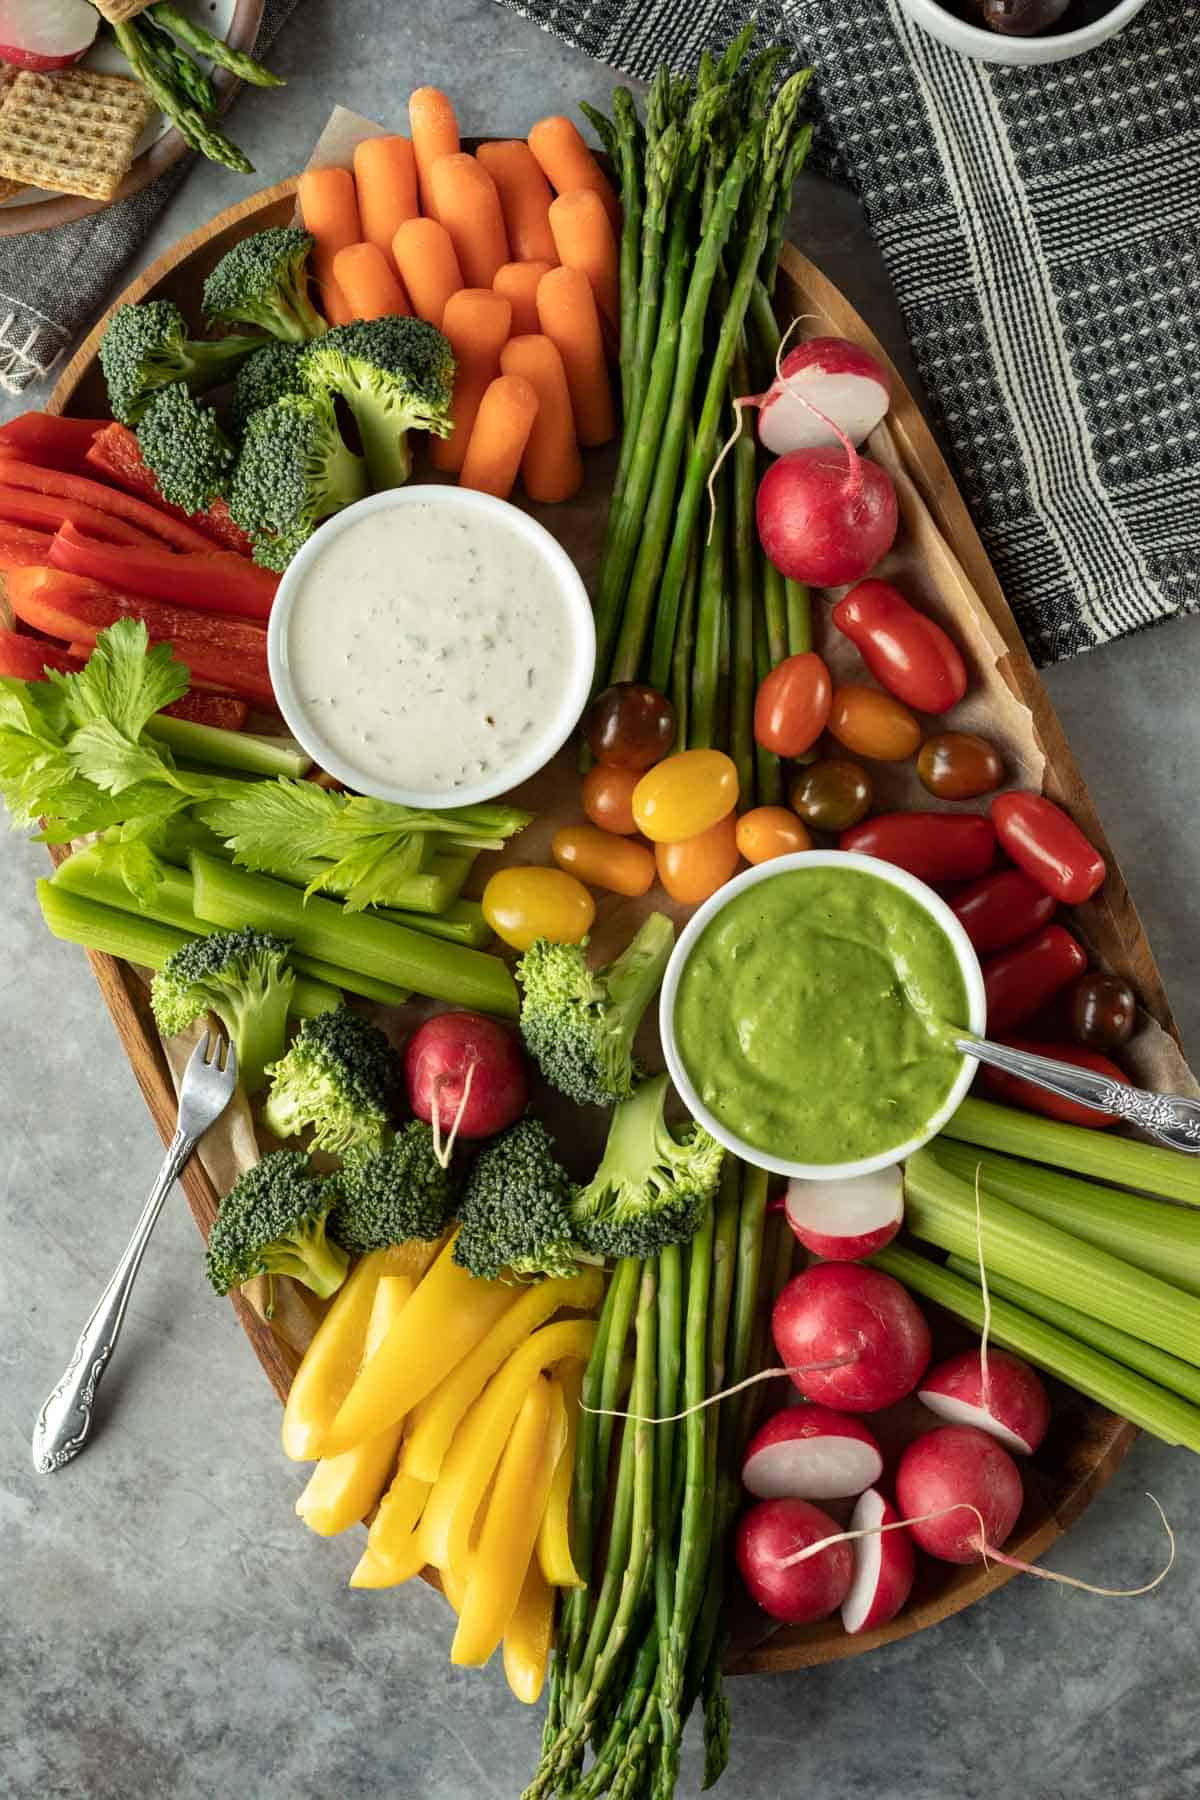 a veggie tray with carrots, yellow pepper, asparagus, radishes, celery, broccoli, and tomatoes.